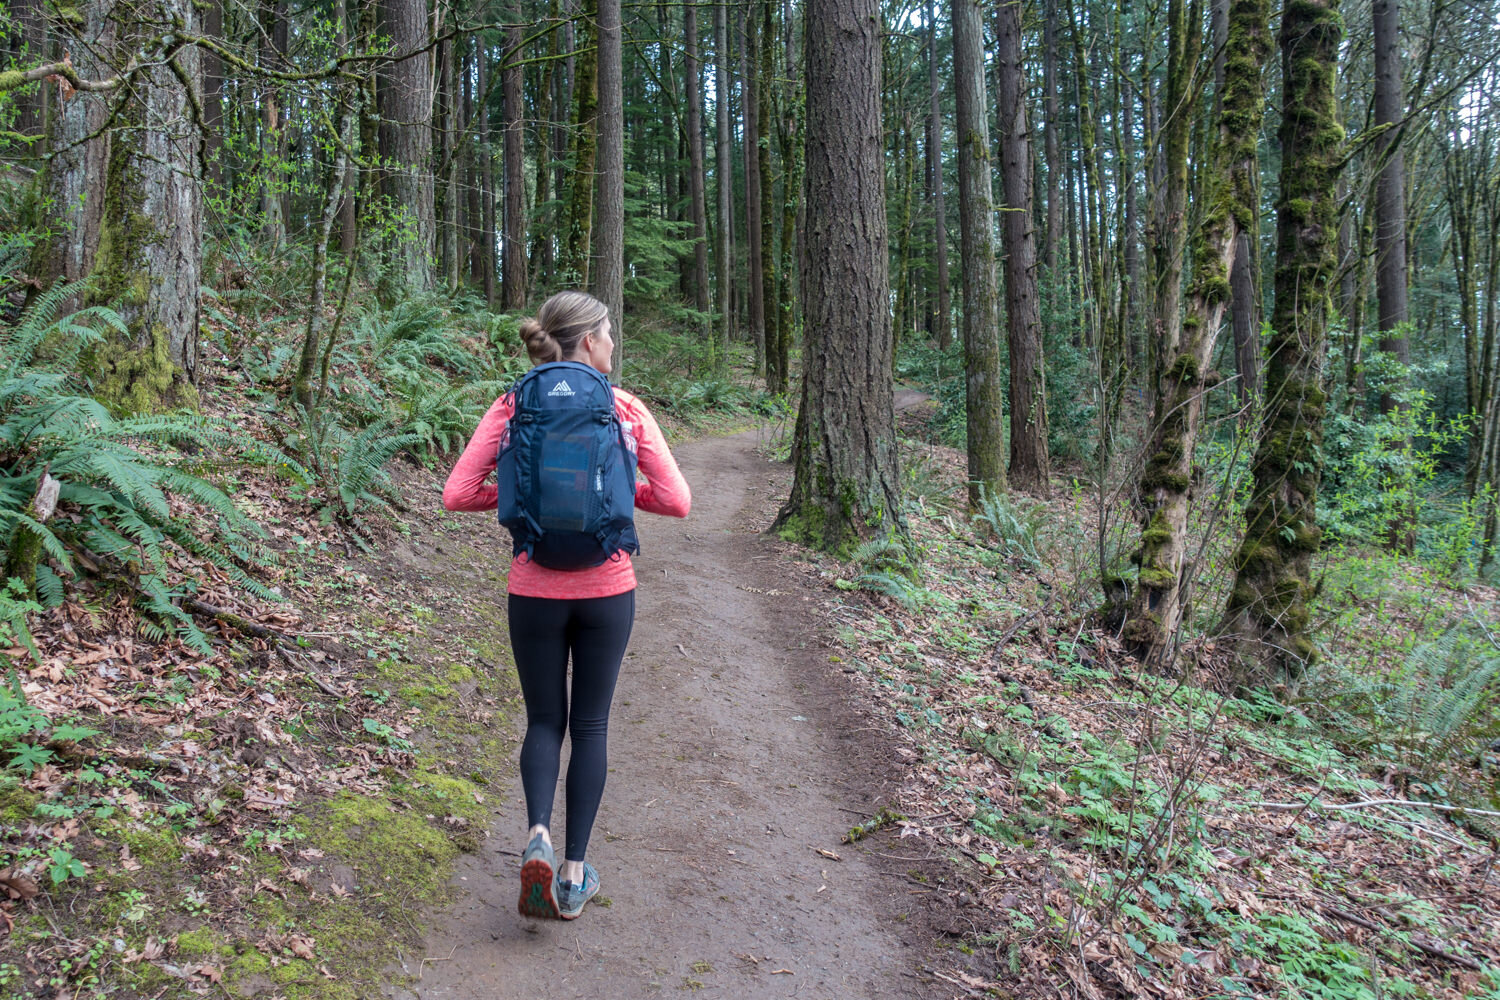 A hiker wearing the Gregory Juno 24 H2O on a forest trail in the Pacific Northwest